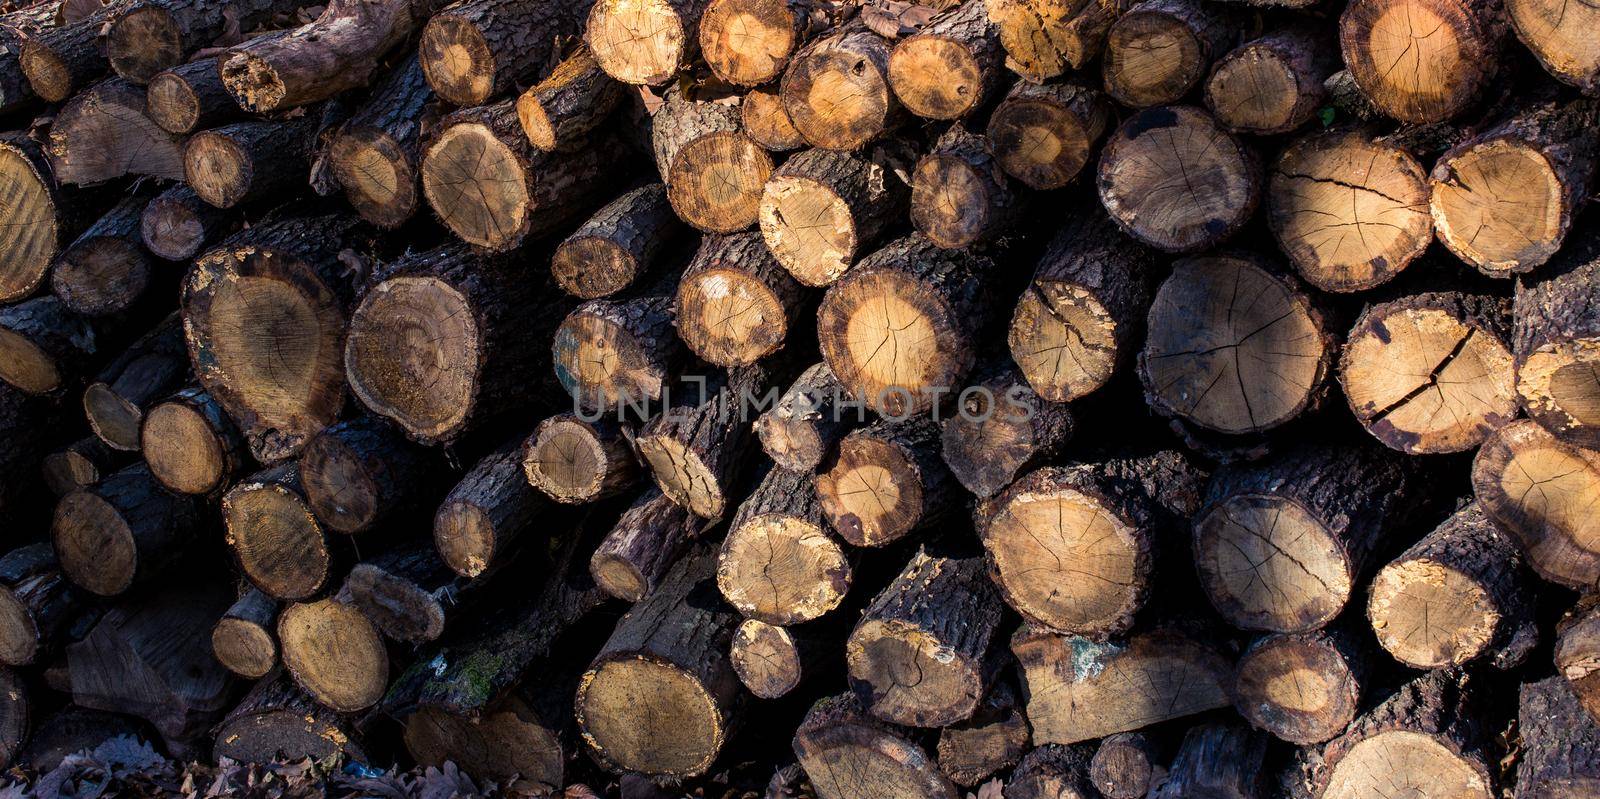 Wooden logs in a forest on display by berkay